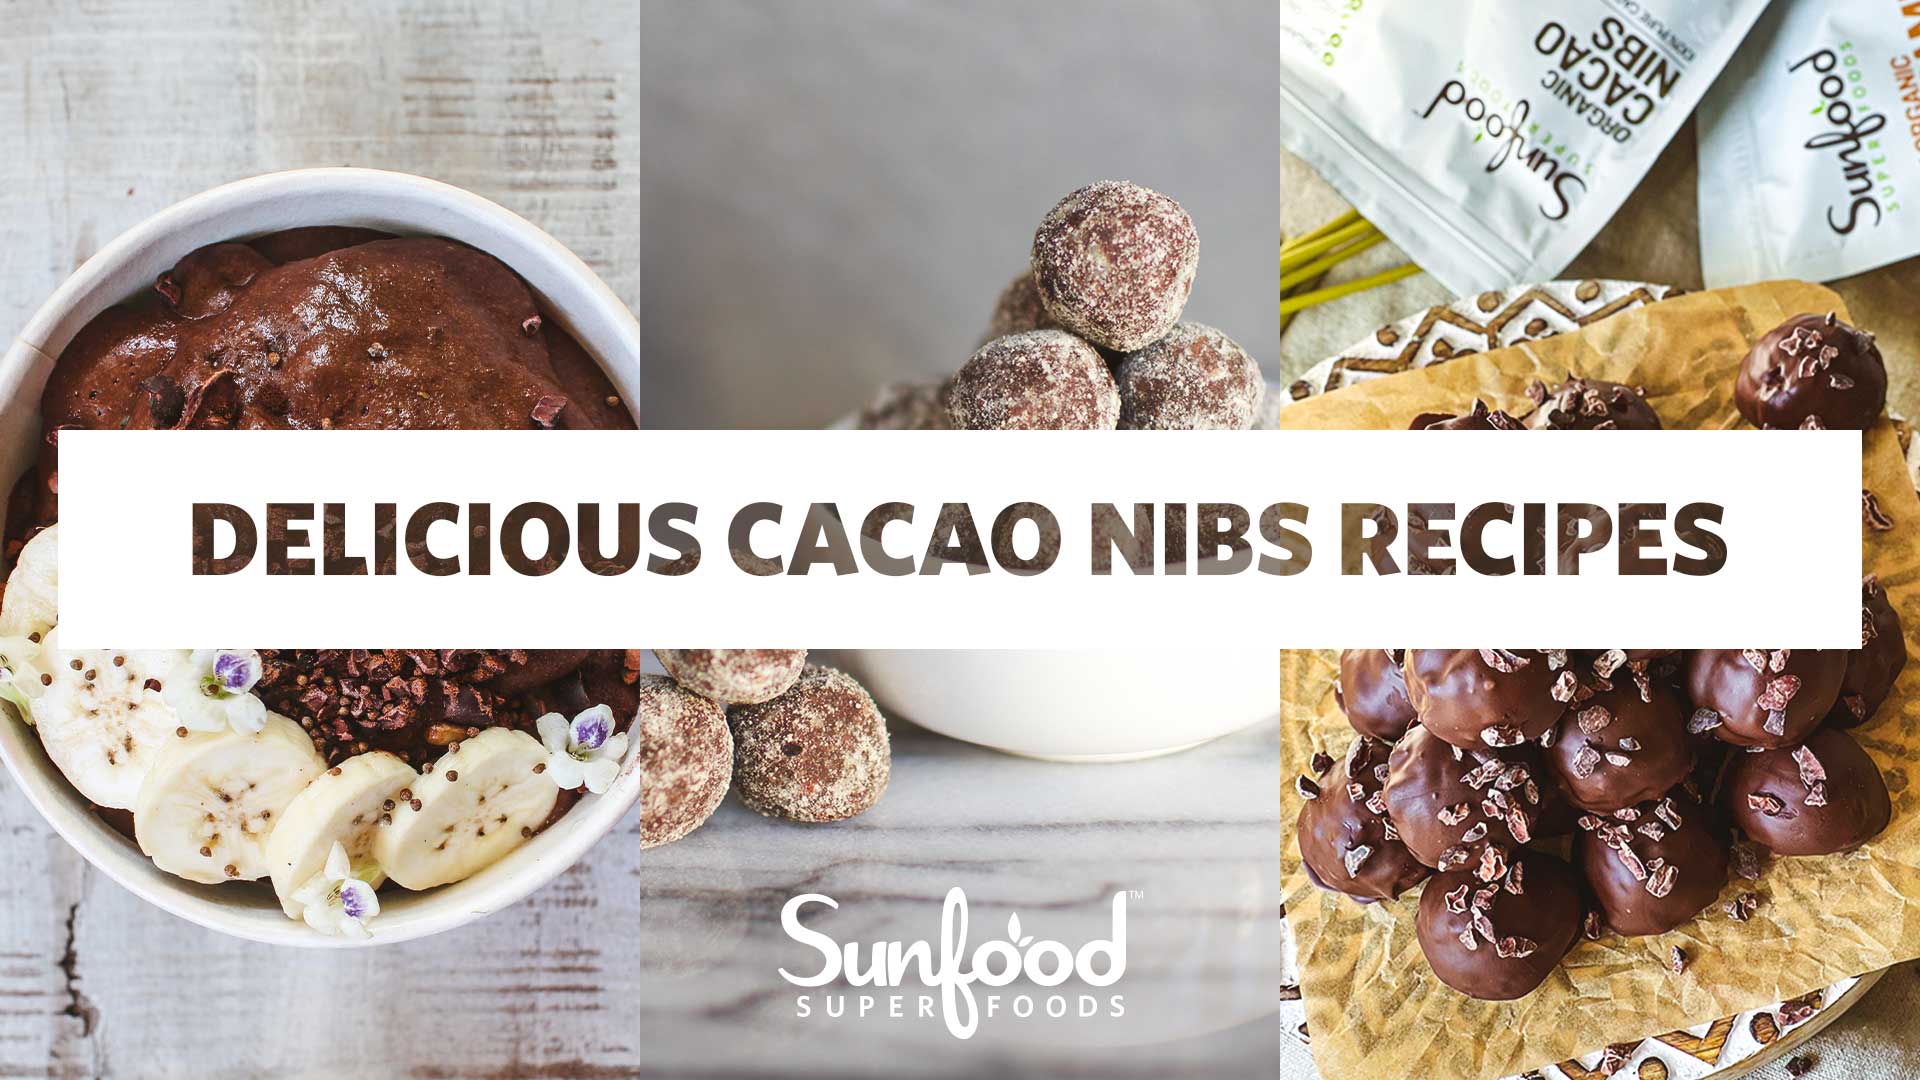 Healthy Chocolate Cravings: Indulge with These Delicious Cacao Nibs Recipes